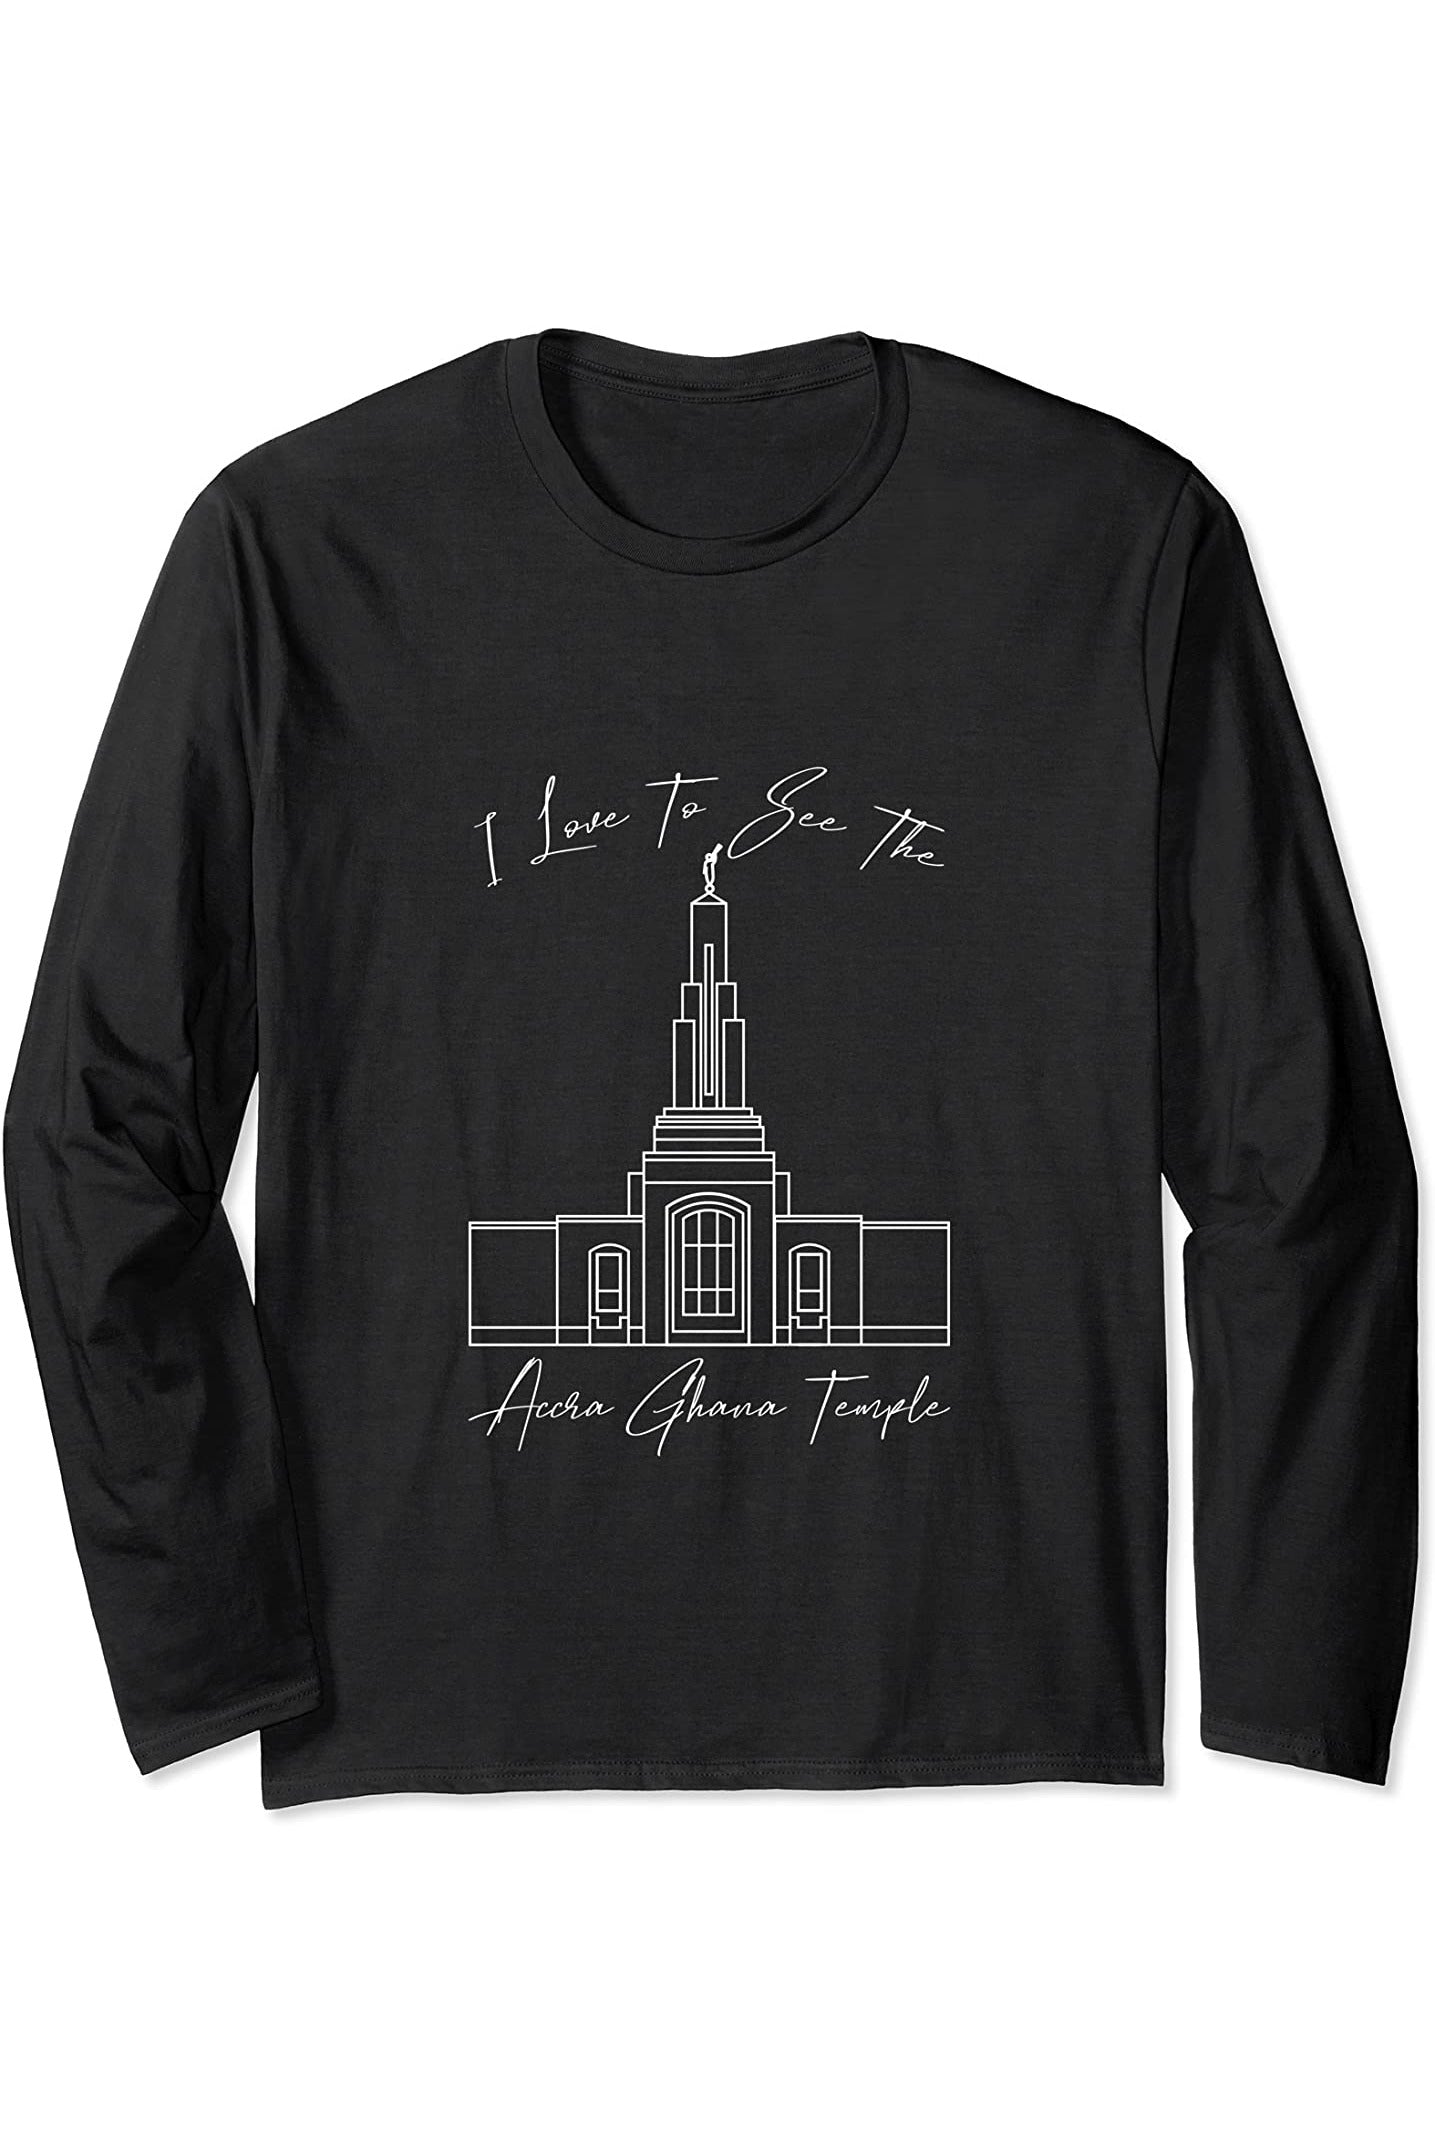 Accra Ghana Temple Long Sleeve T-Shirt - Calligraphy Style (English) US